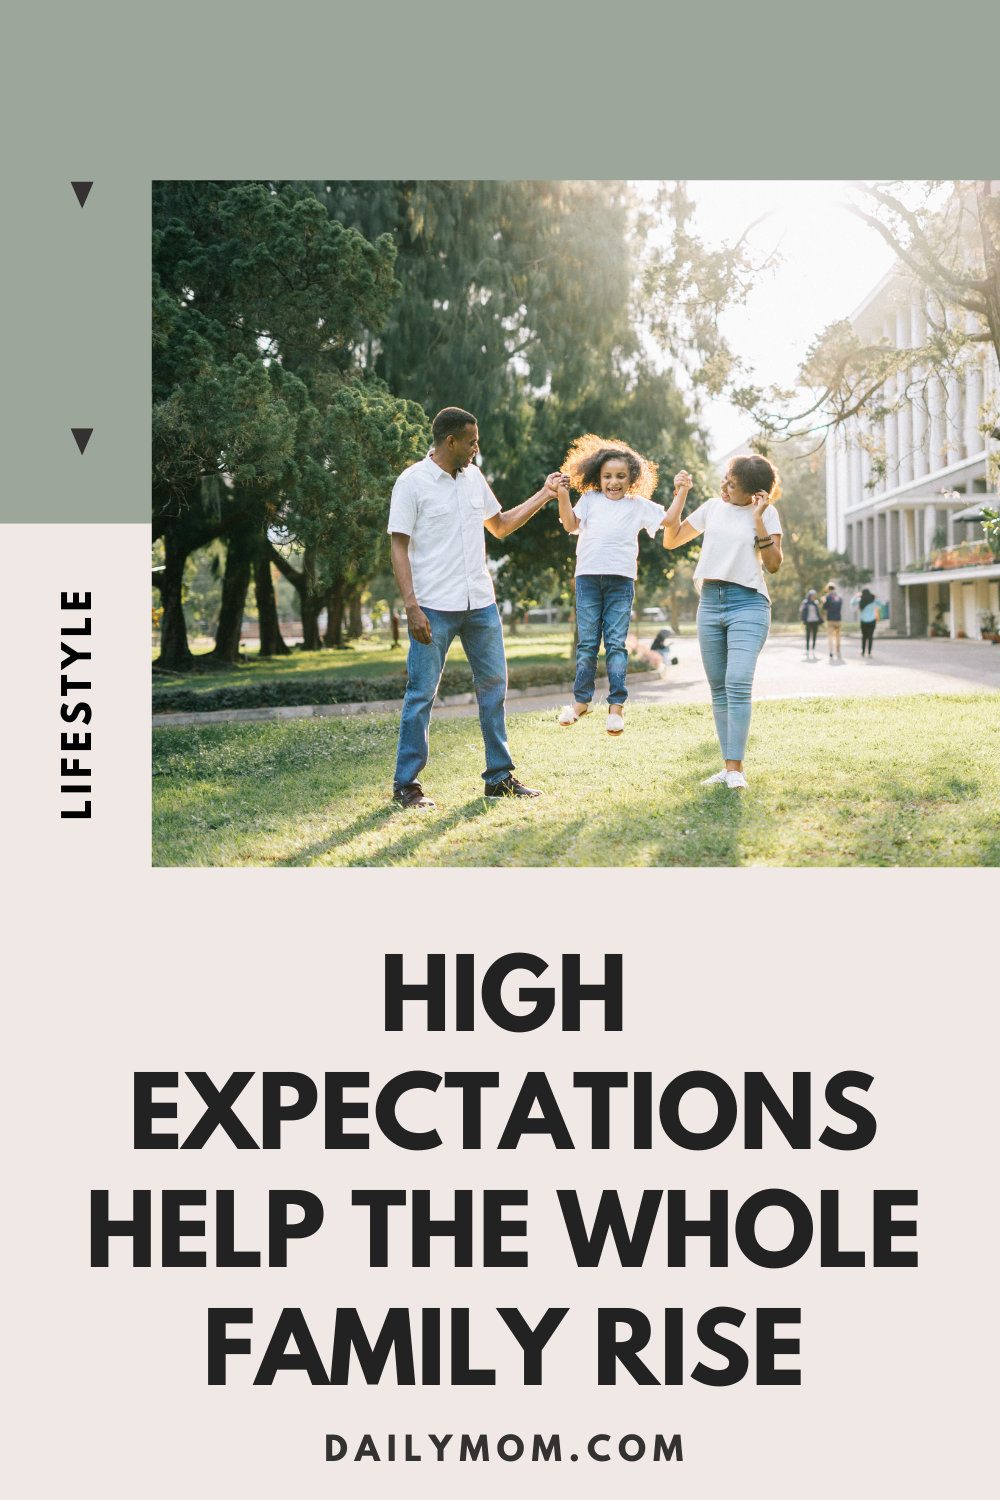 How High Expectations Help The Whole Family Rise